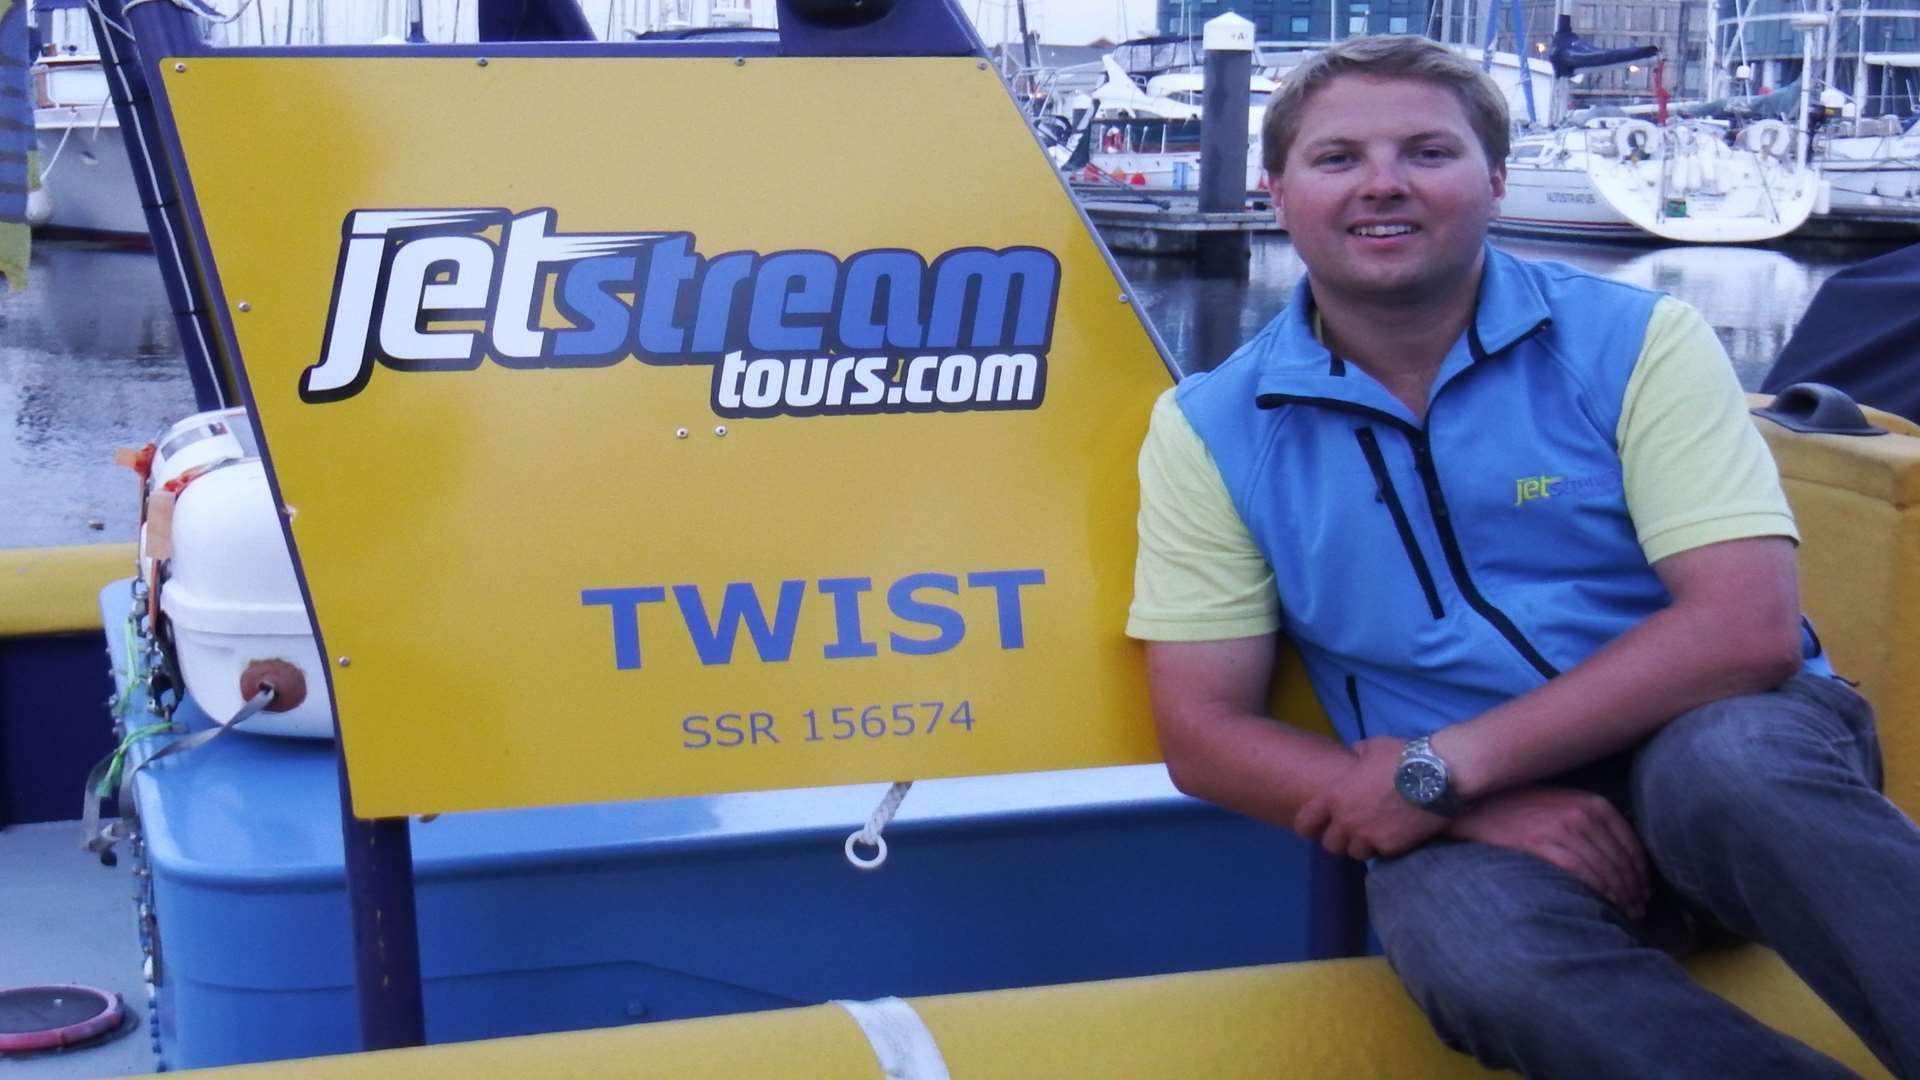 Richard Bain of Jet Stream Tours s looking to open up a river taxi service on the Medway